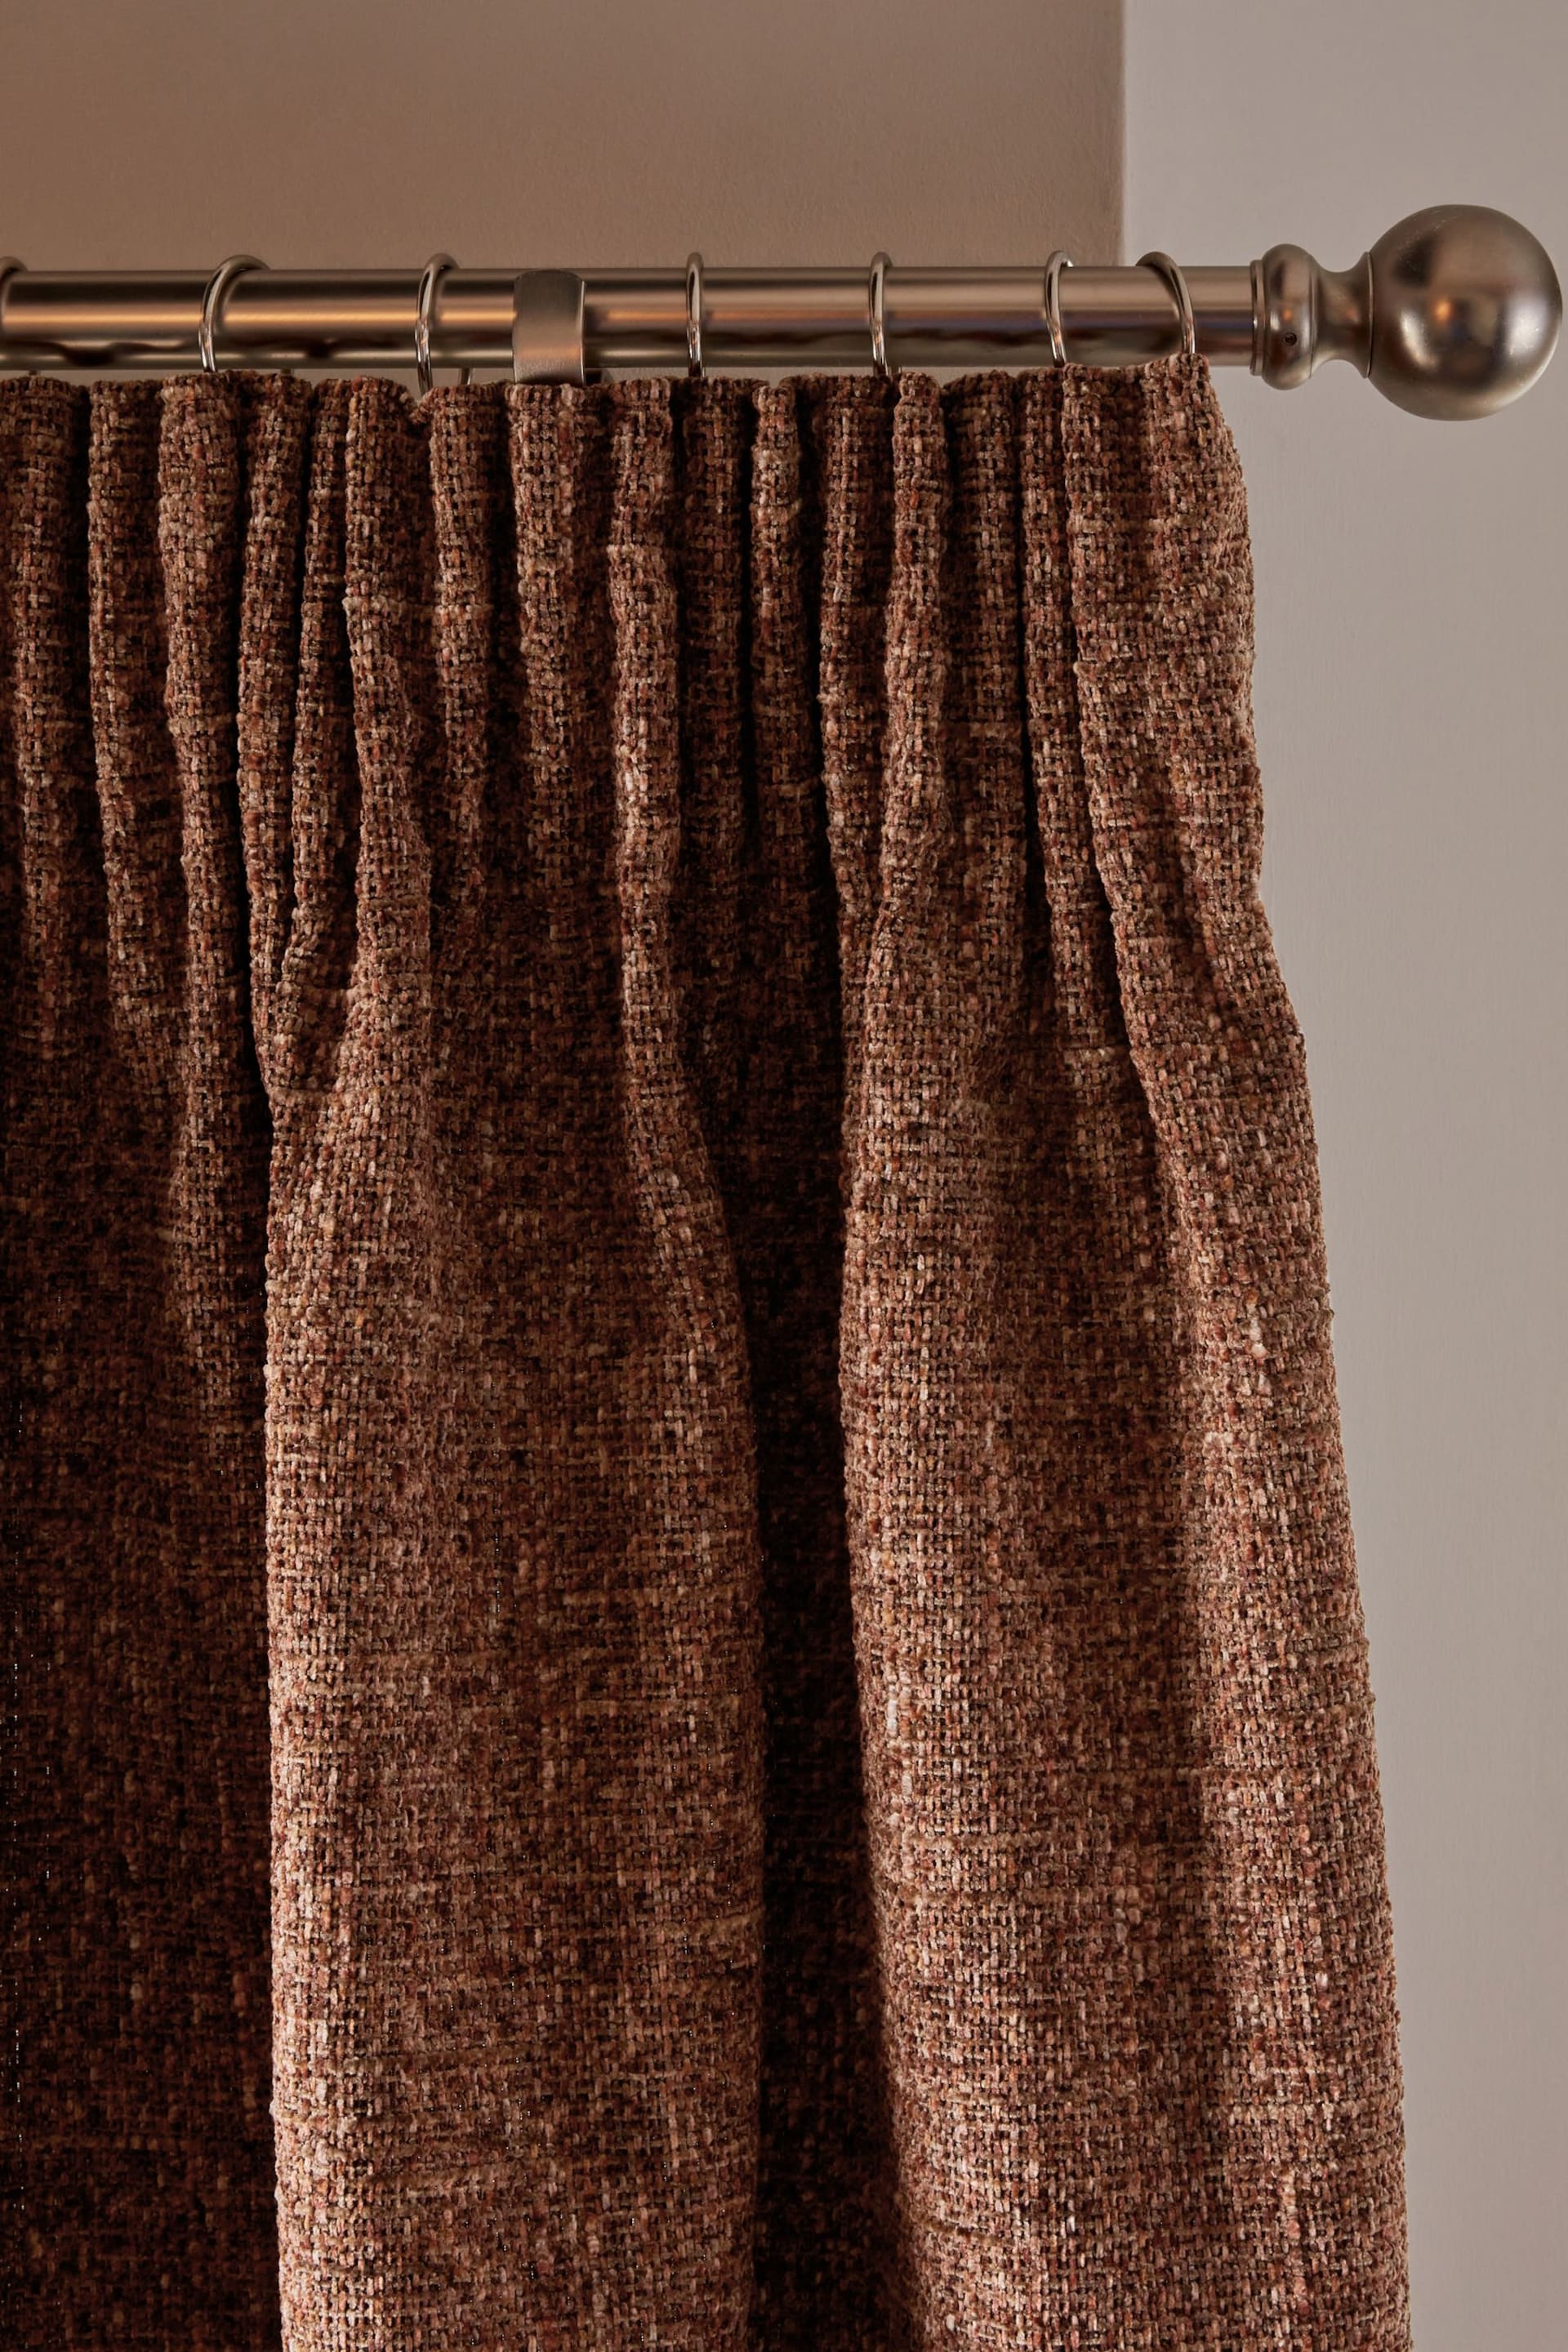 Rust Brown Next Multi Chenille Pencil Pleat Lined Curtains - Image 4 of 5